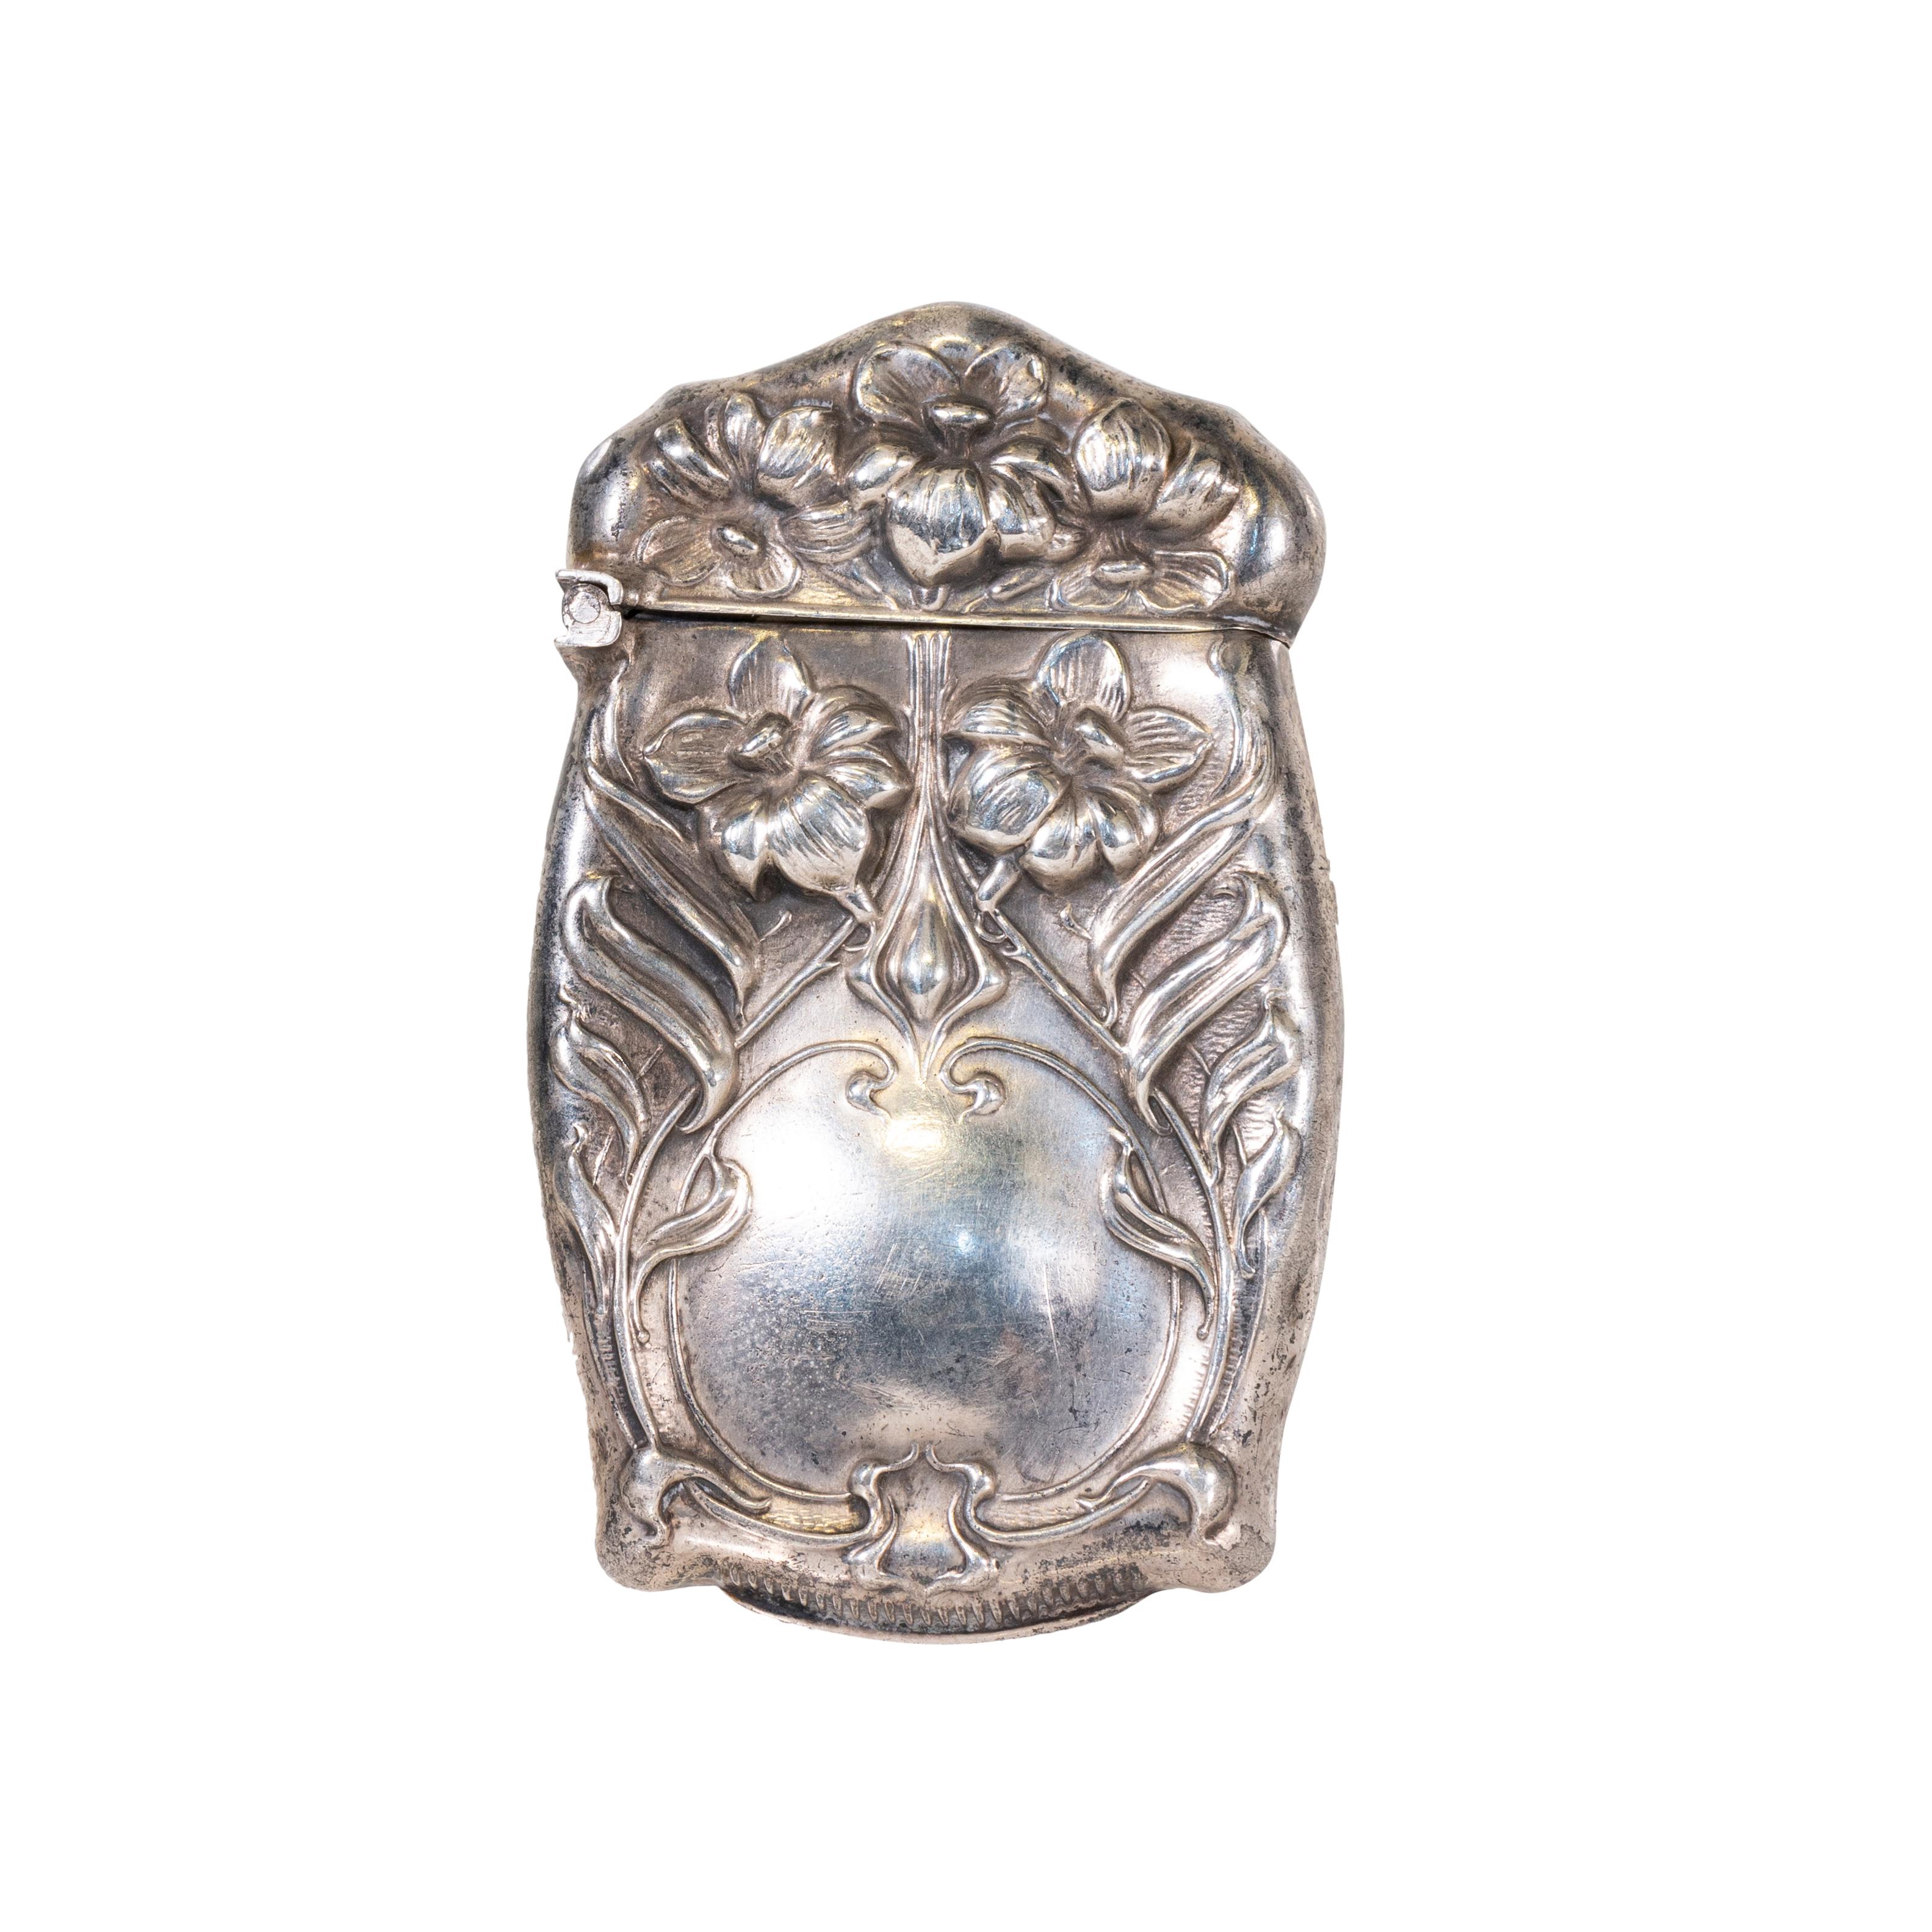 19th Century Sterling Art Nouveau Match Safe Collection In Good Condition For Sale In Coeur d'Alene, ID